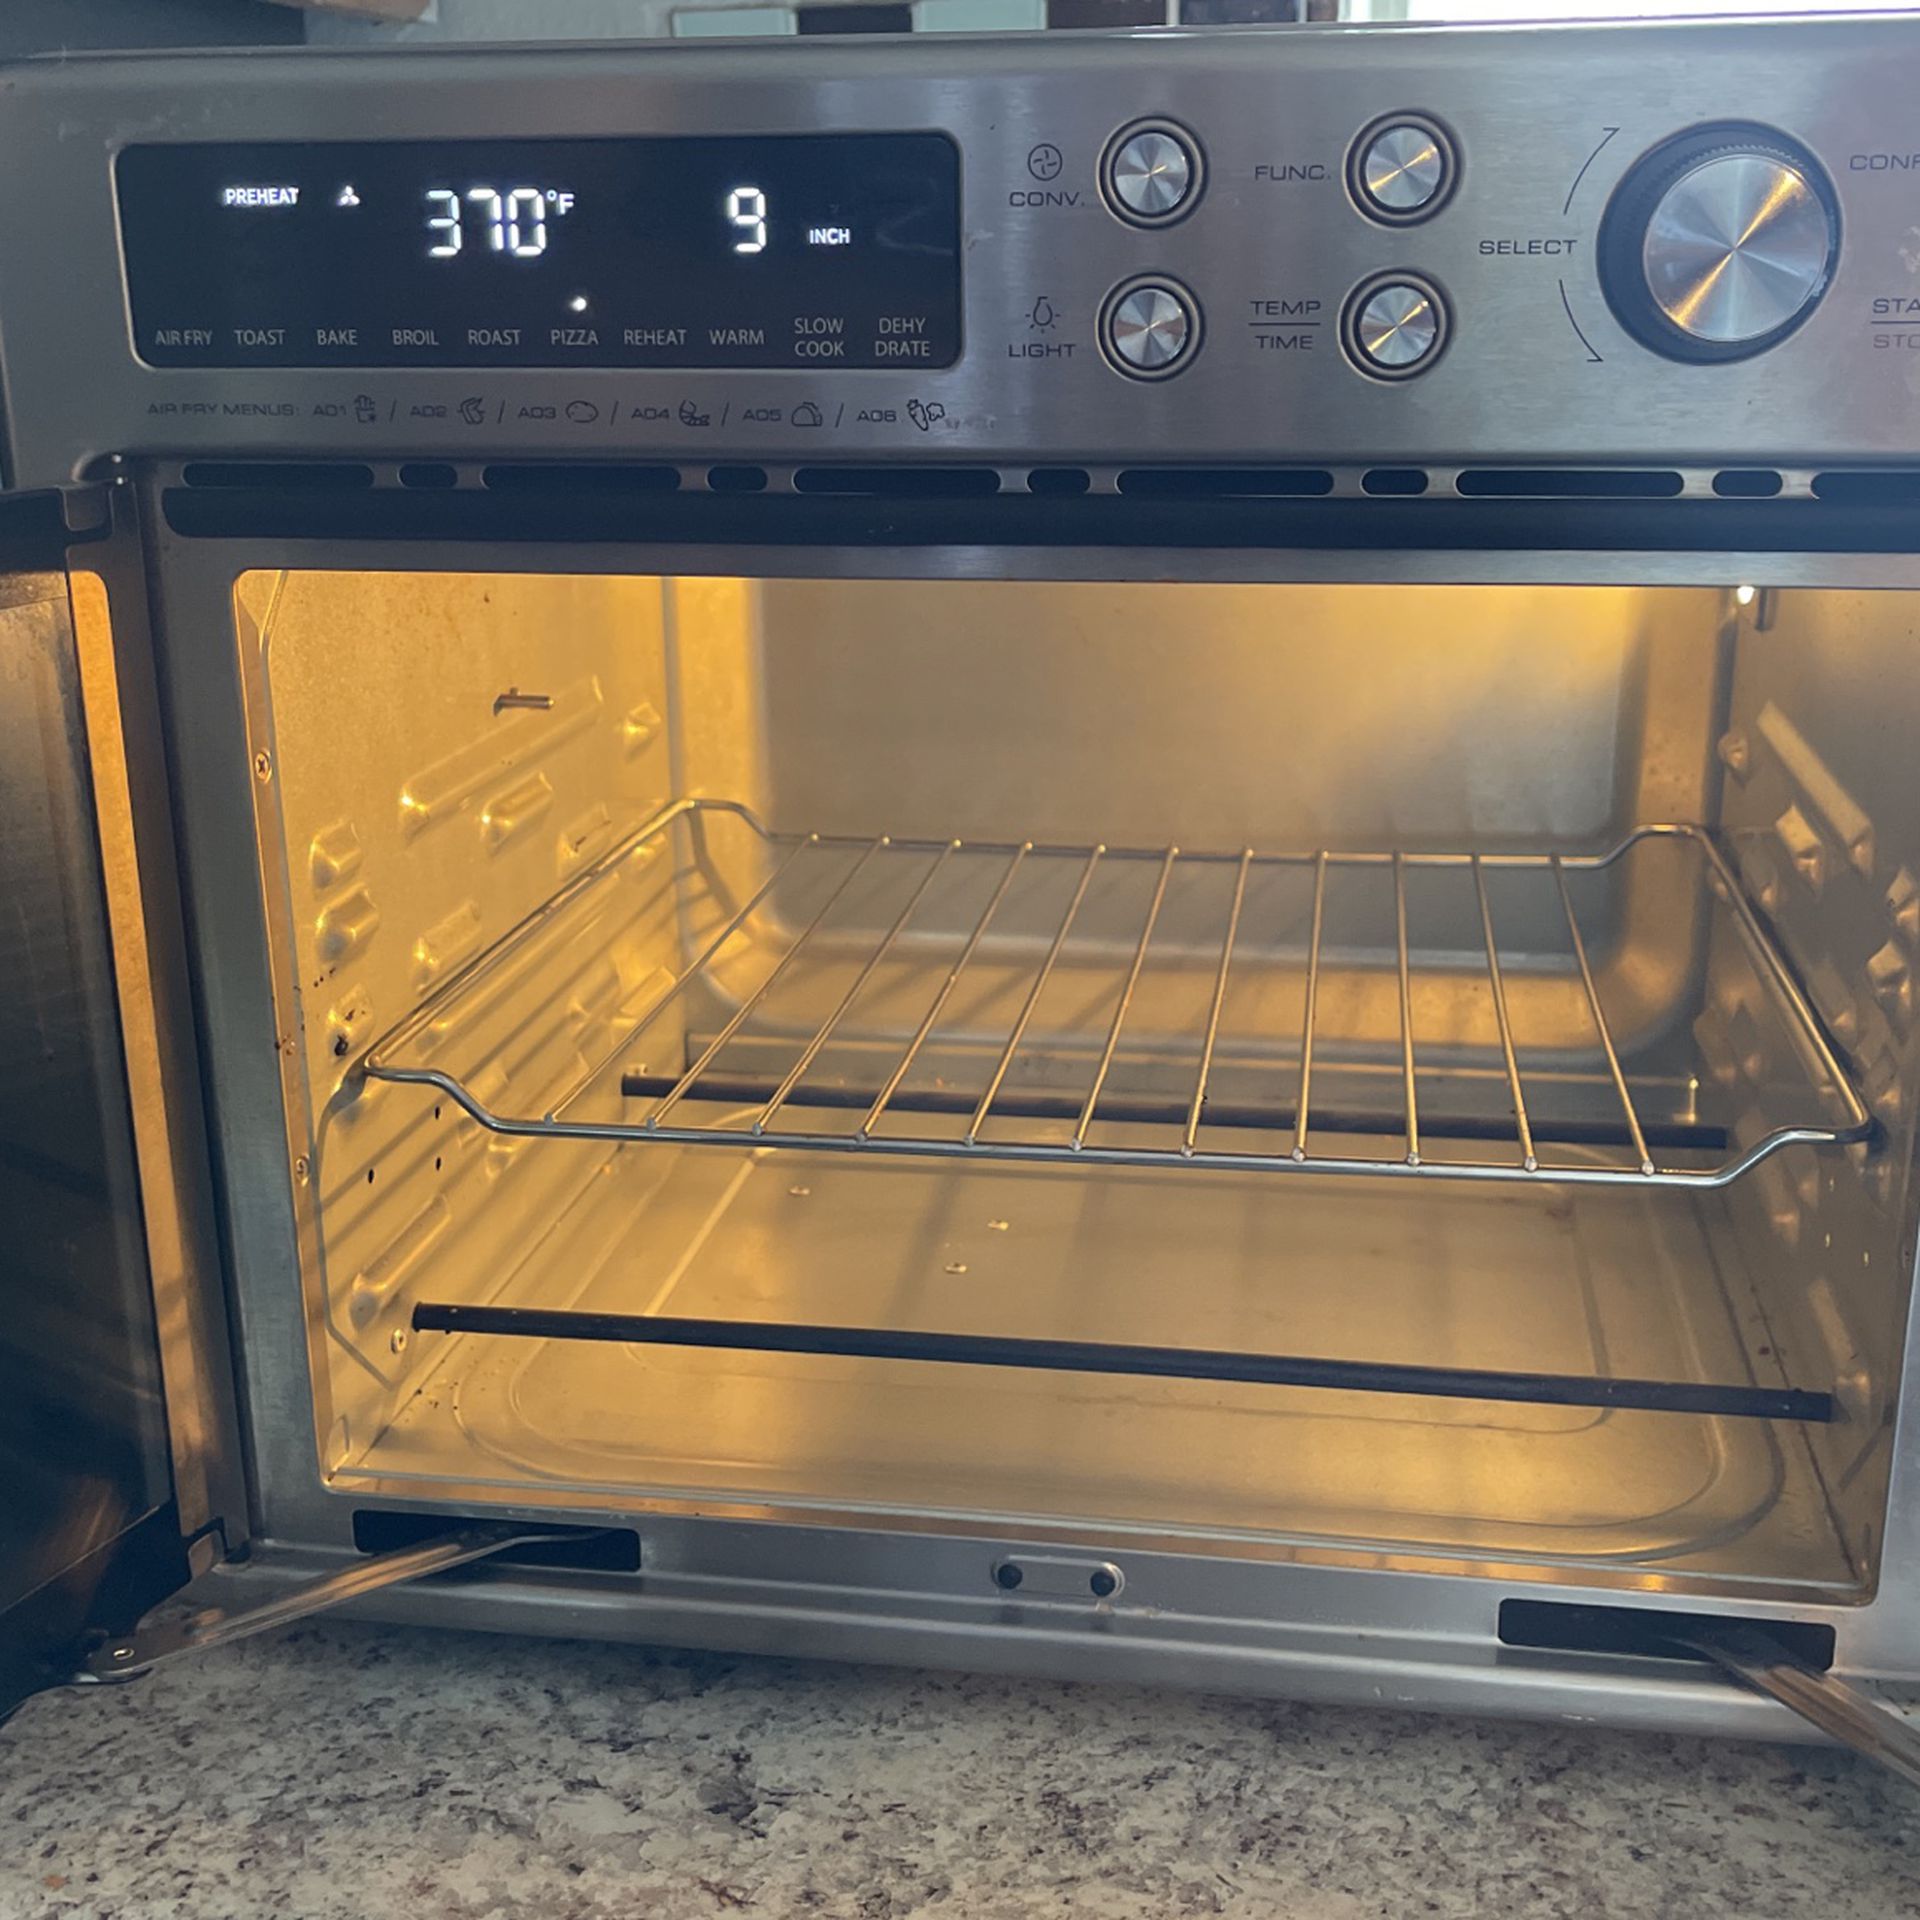 Black Decker Air Fryer/toaster Oven for Sale in Laud By Sea, FL - OfferUp